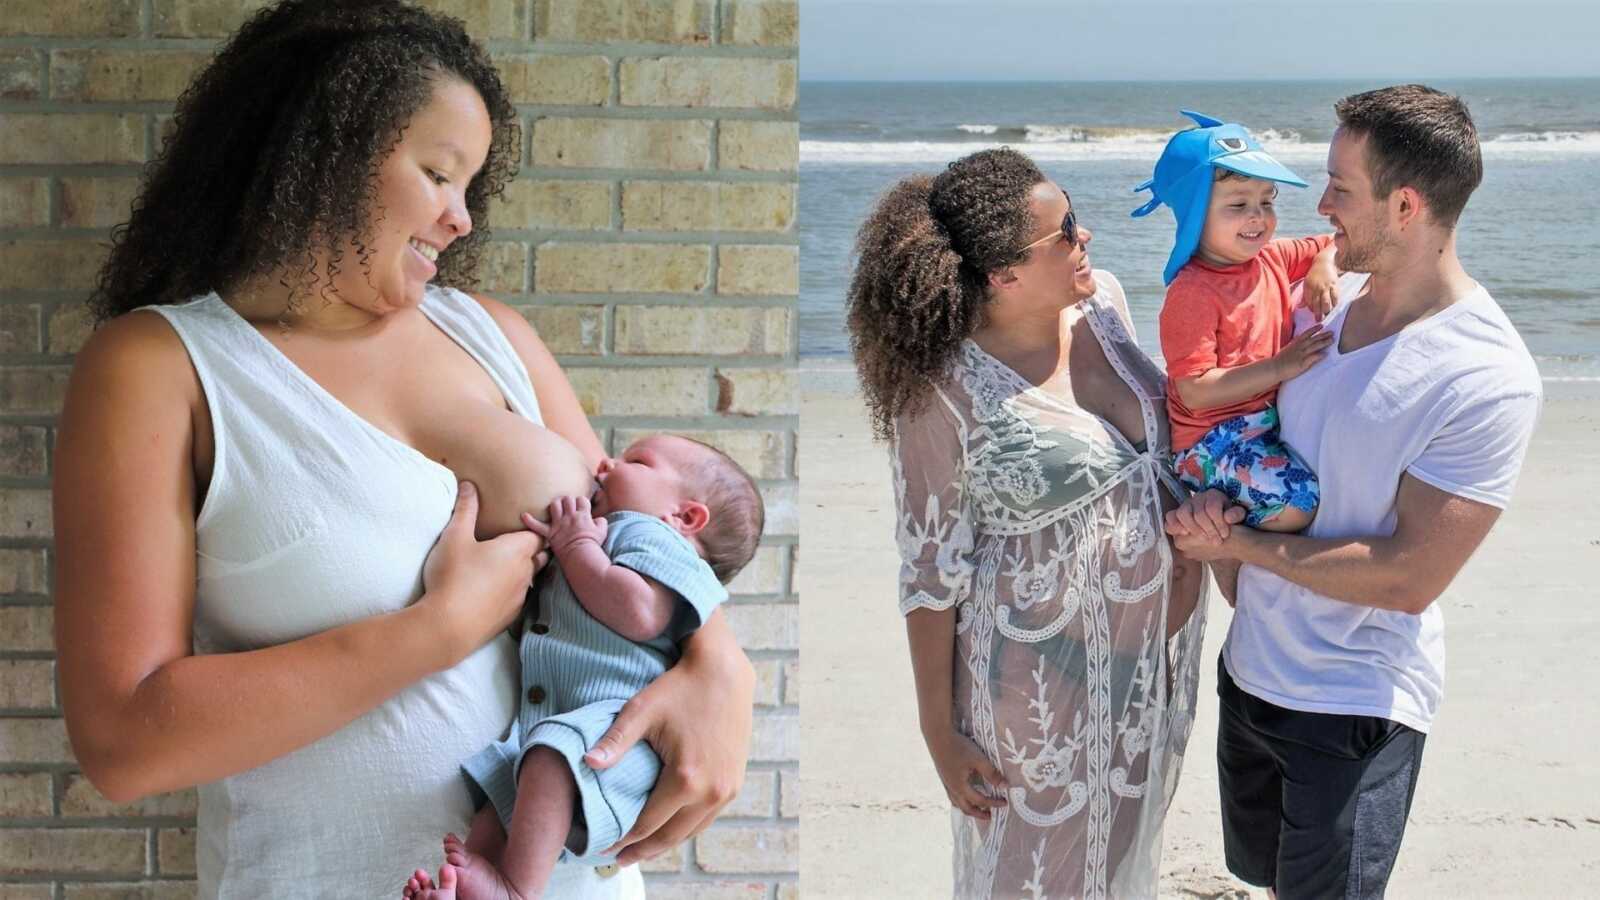 On the left, mom breastfeeds her young son. On the right, family takes a group photo on the beach.